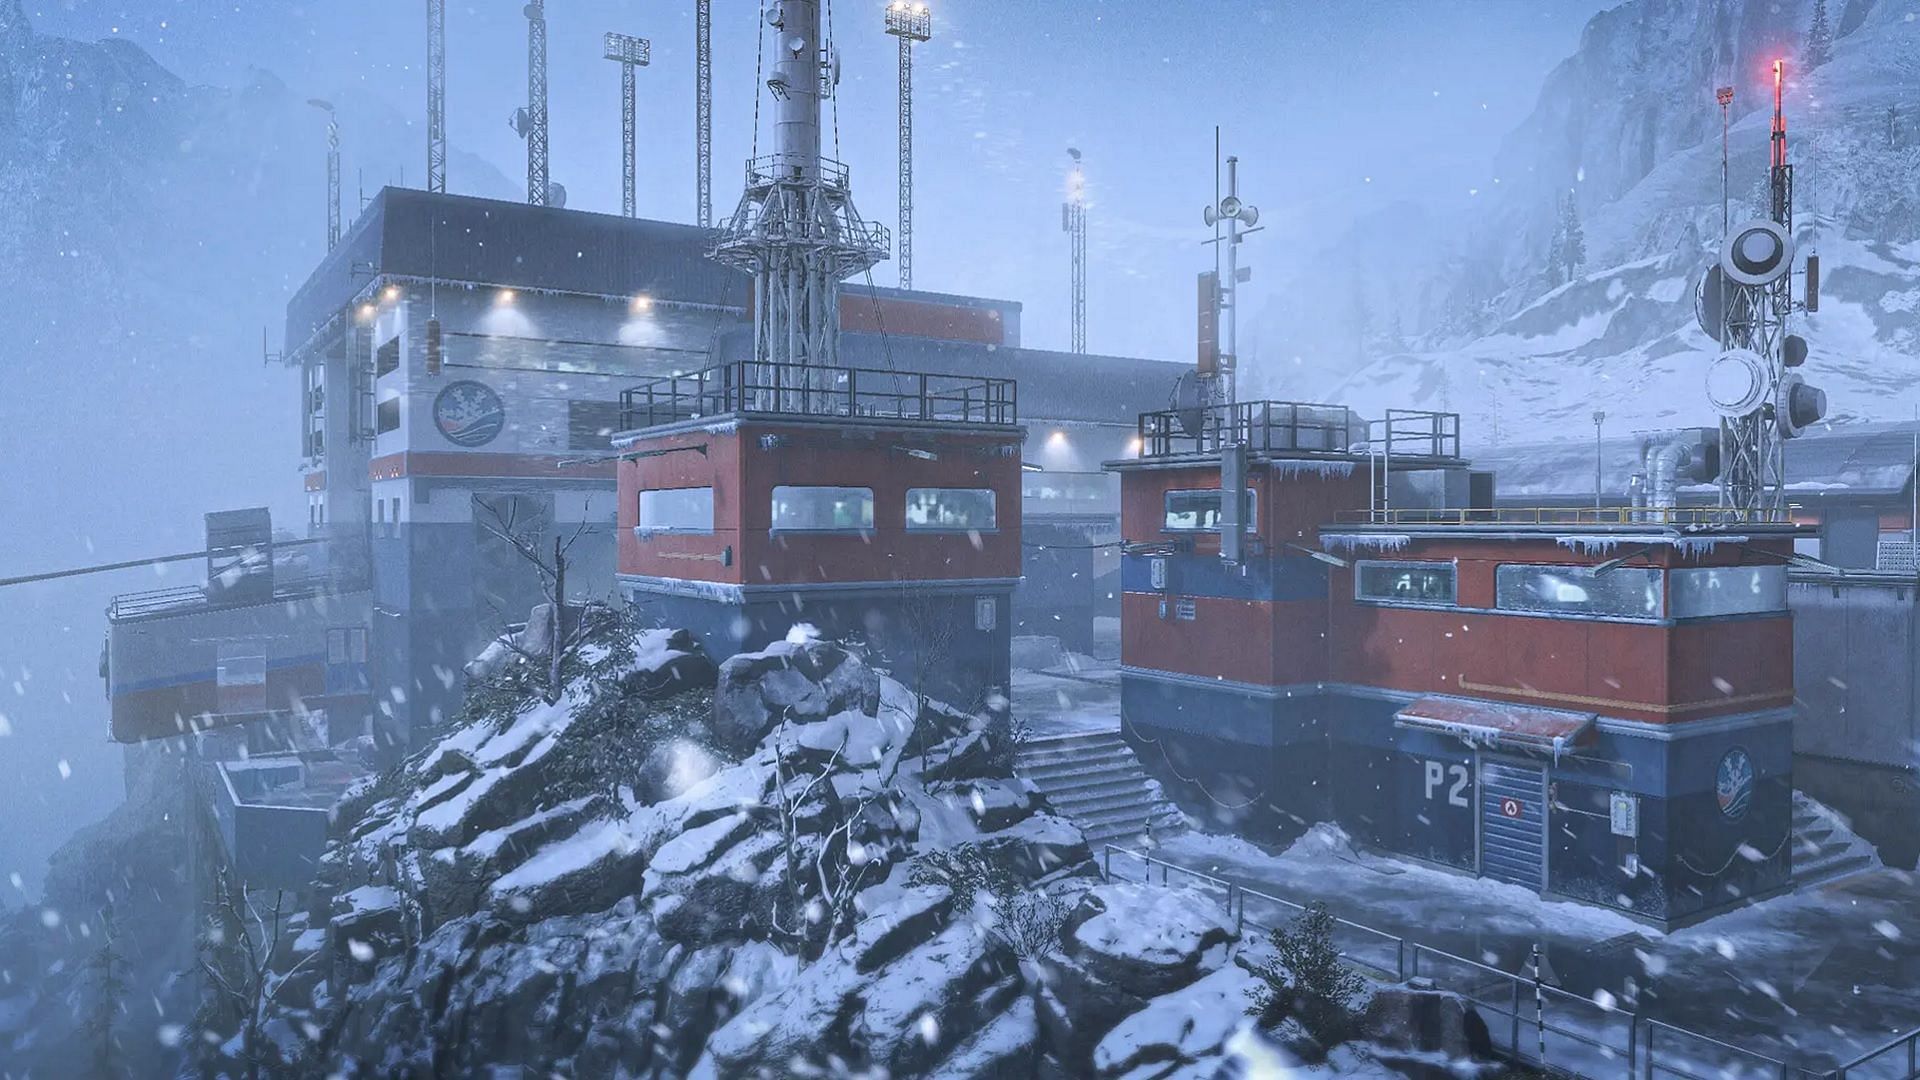 Incline is a brand new core 6v6 map coming to Modern Warfare 3 with Season 3 Reloaded